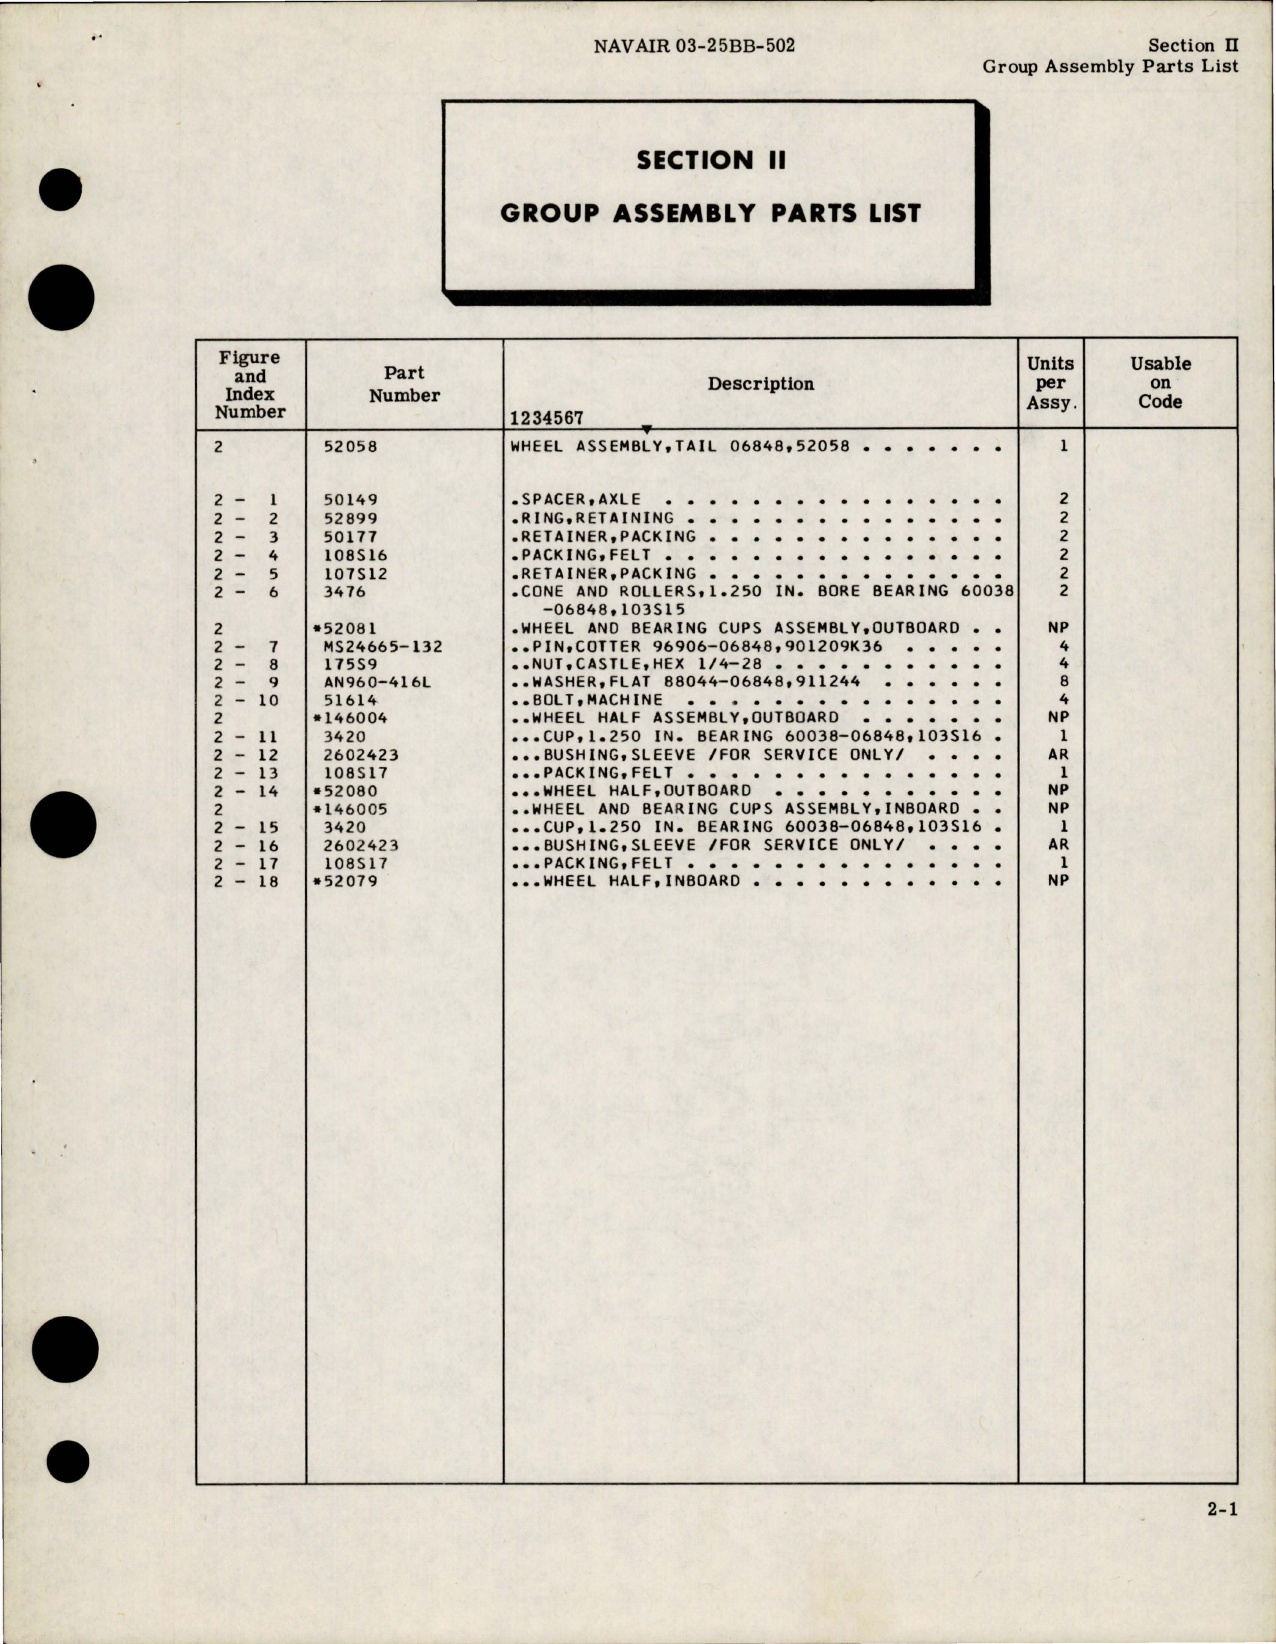 Sample page 9 from AirCorps Library document: Illustrated Parts Breakdown for Main Wheel Assemblies, Nose Wheel Assemblies and Tail Wheel Assemblies